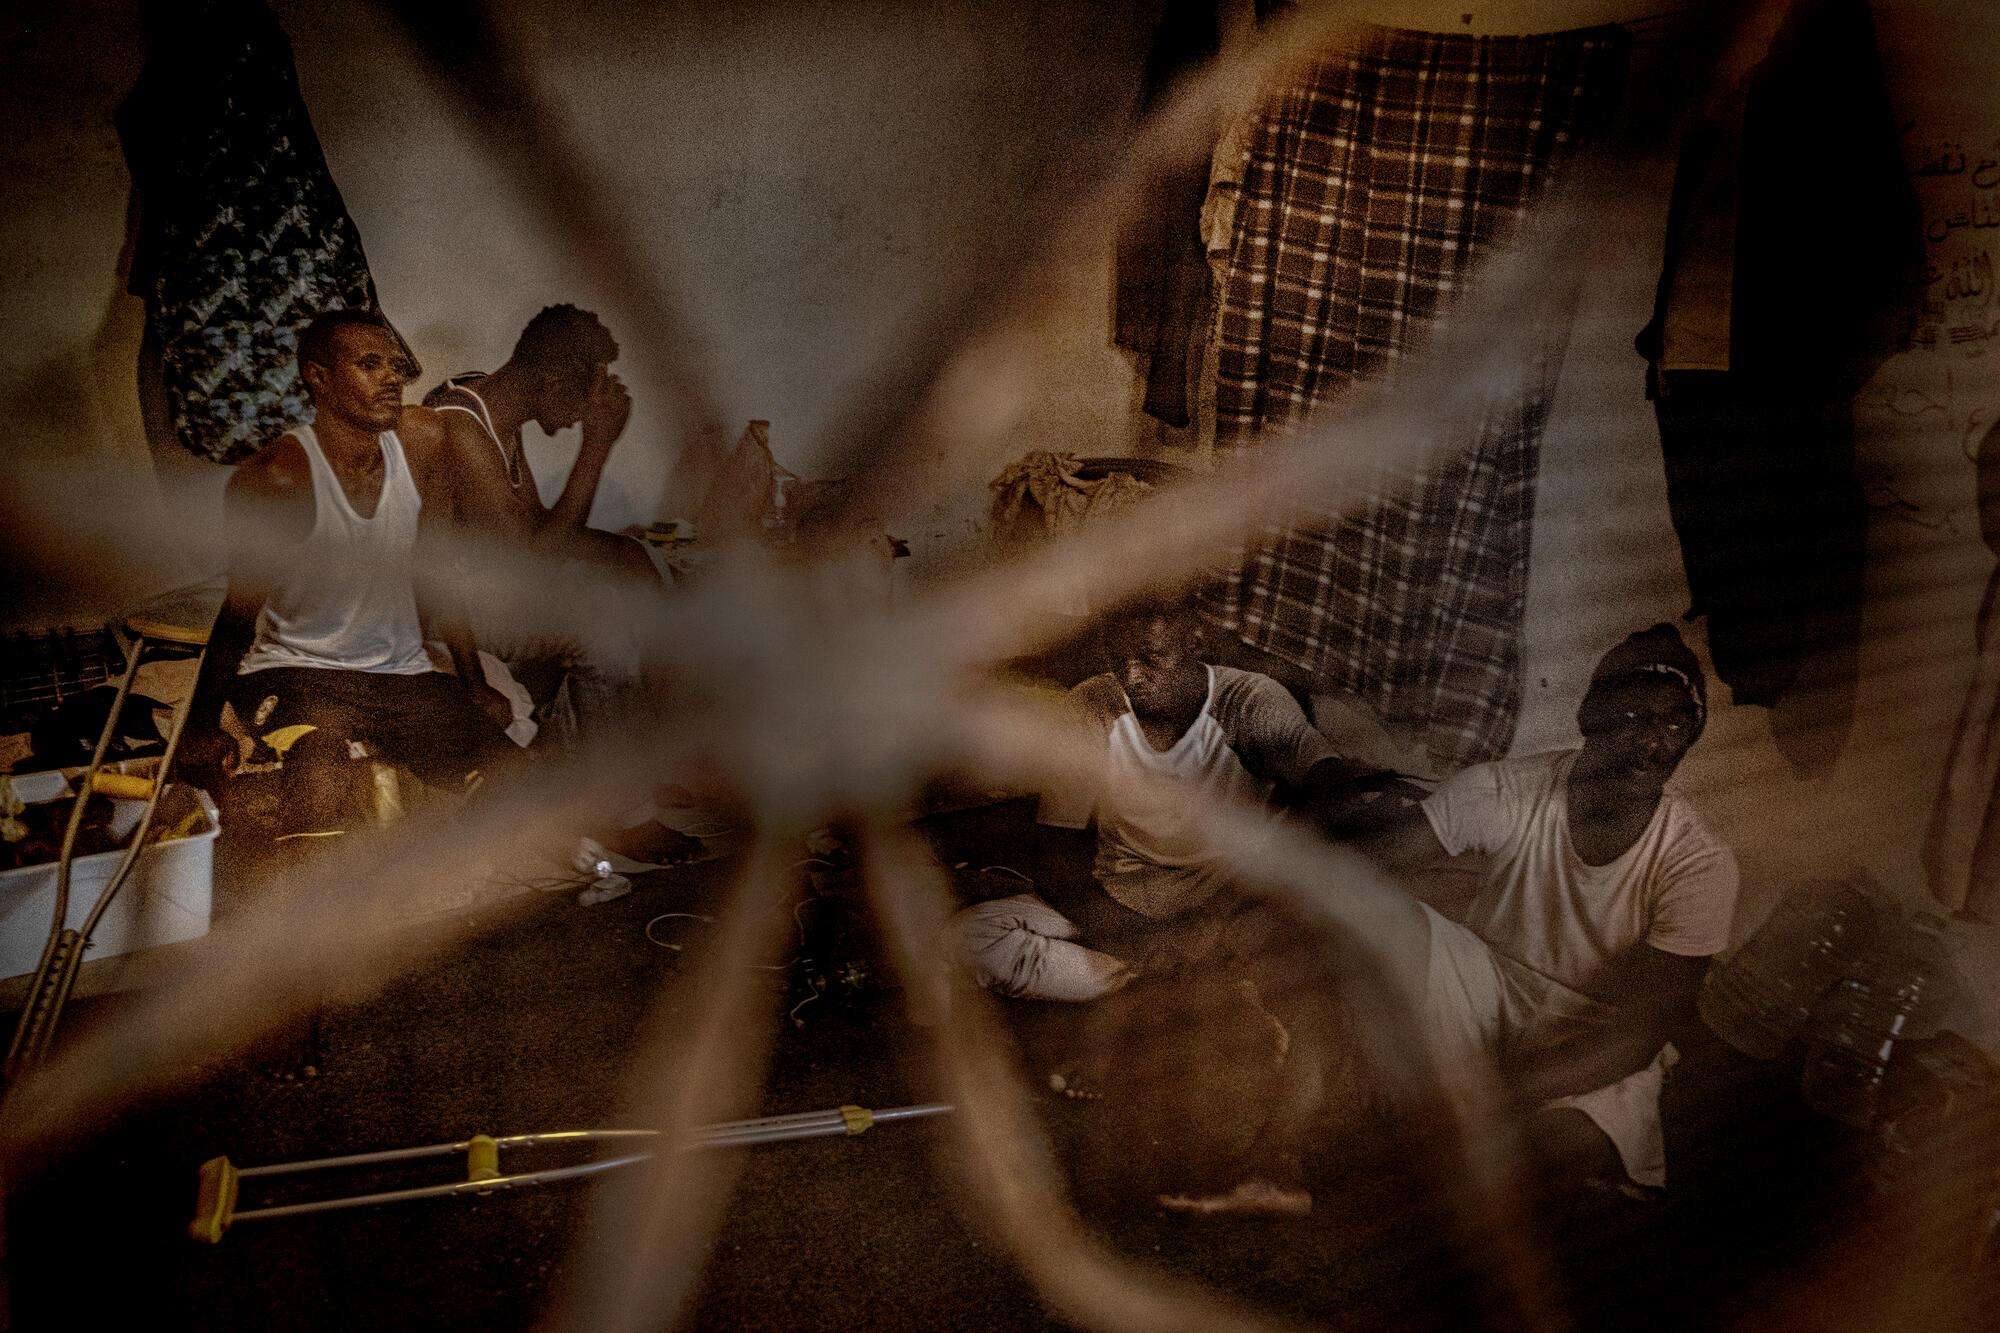 A group of migrants and refugees gathered together in a shared dwelling in Libya in August 2021.